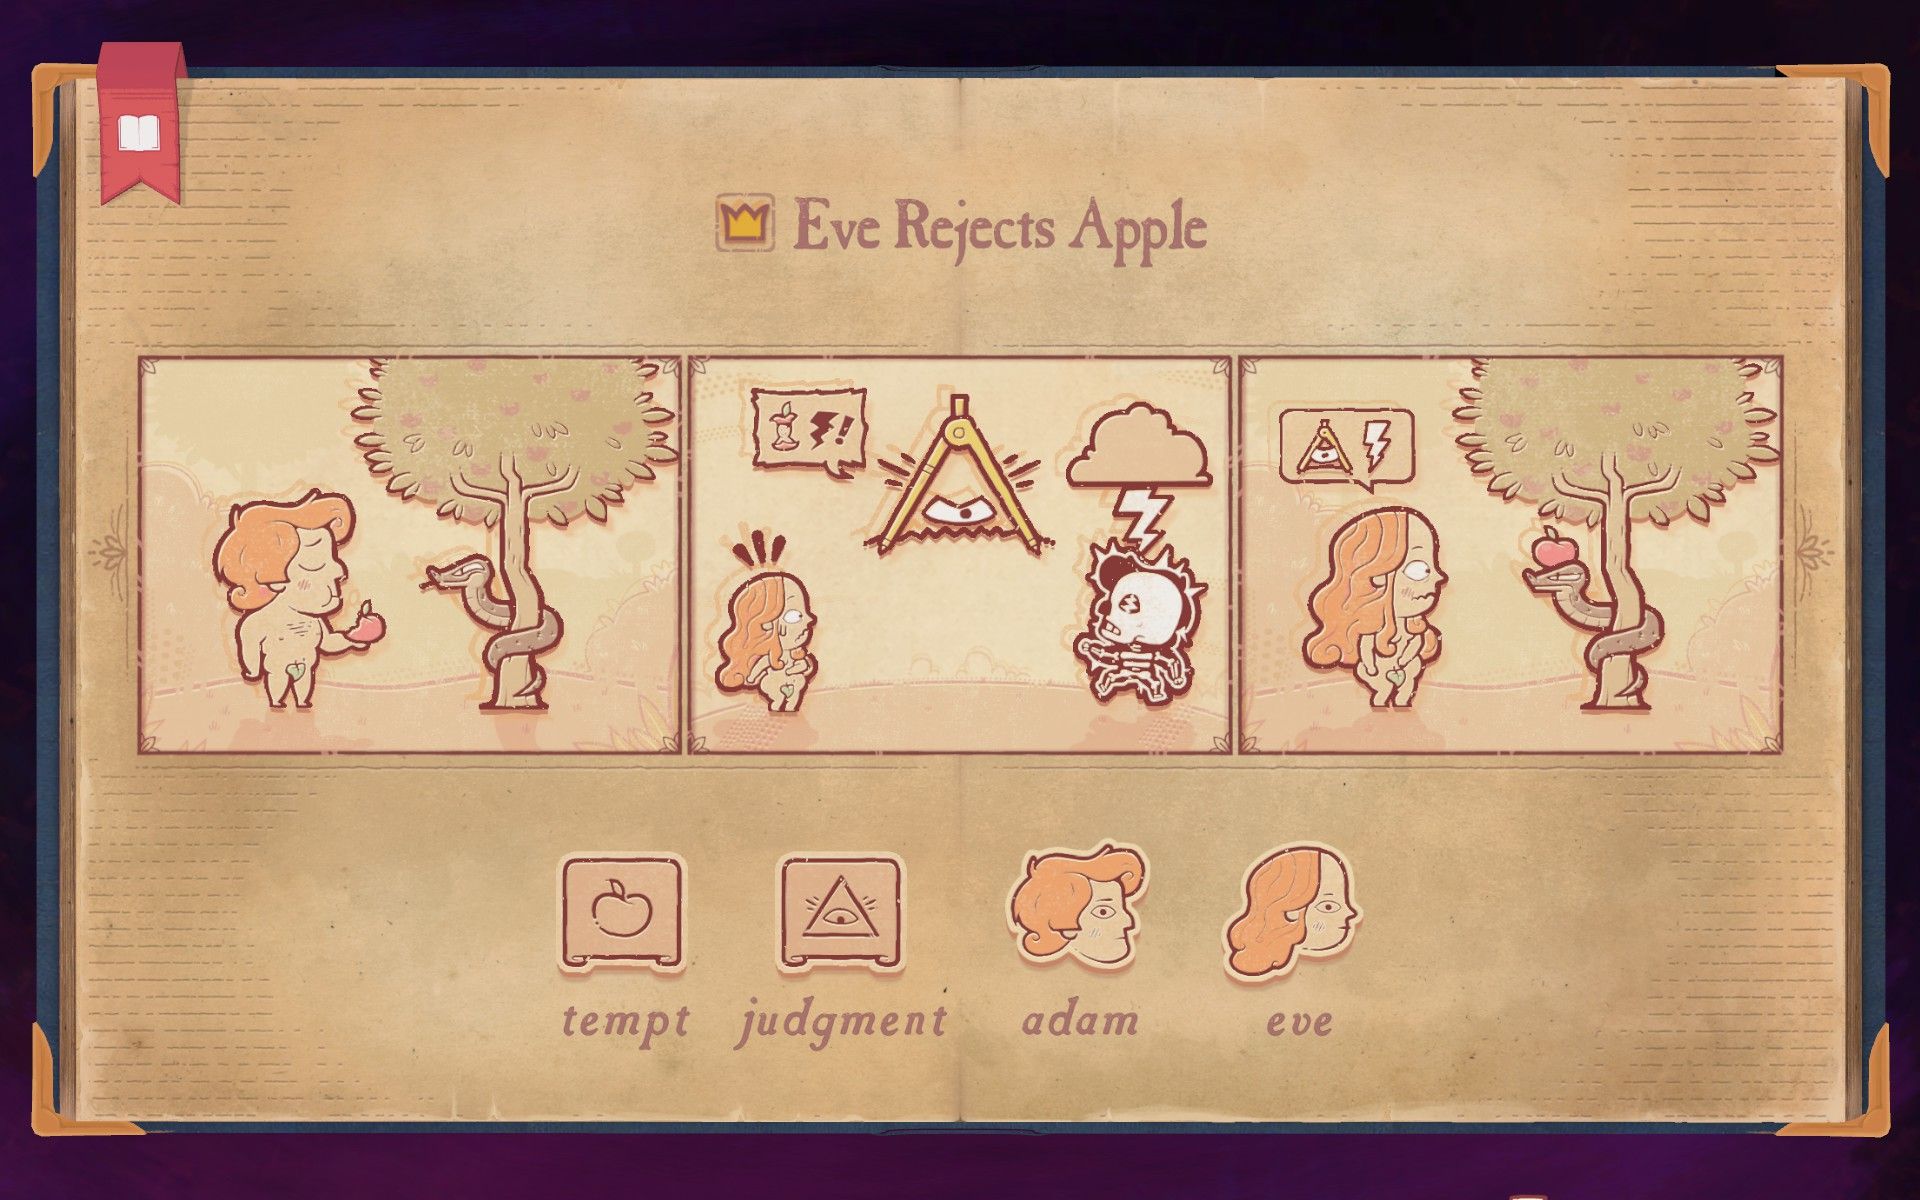 The solution to Chapter 10 Temptation in Storyteller, showing Eve rejecting the apple.